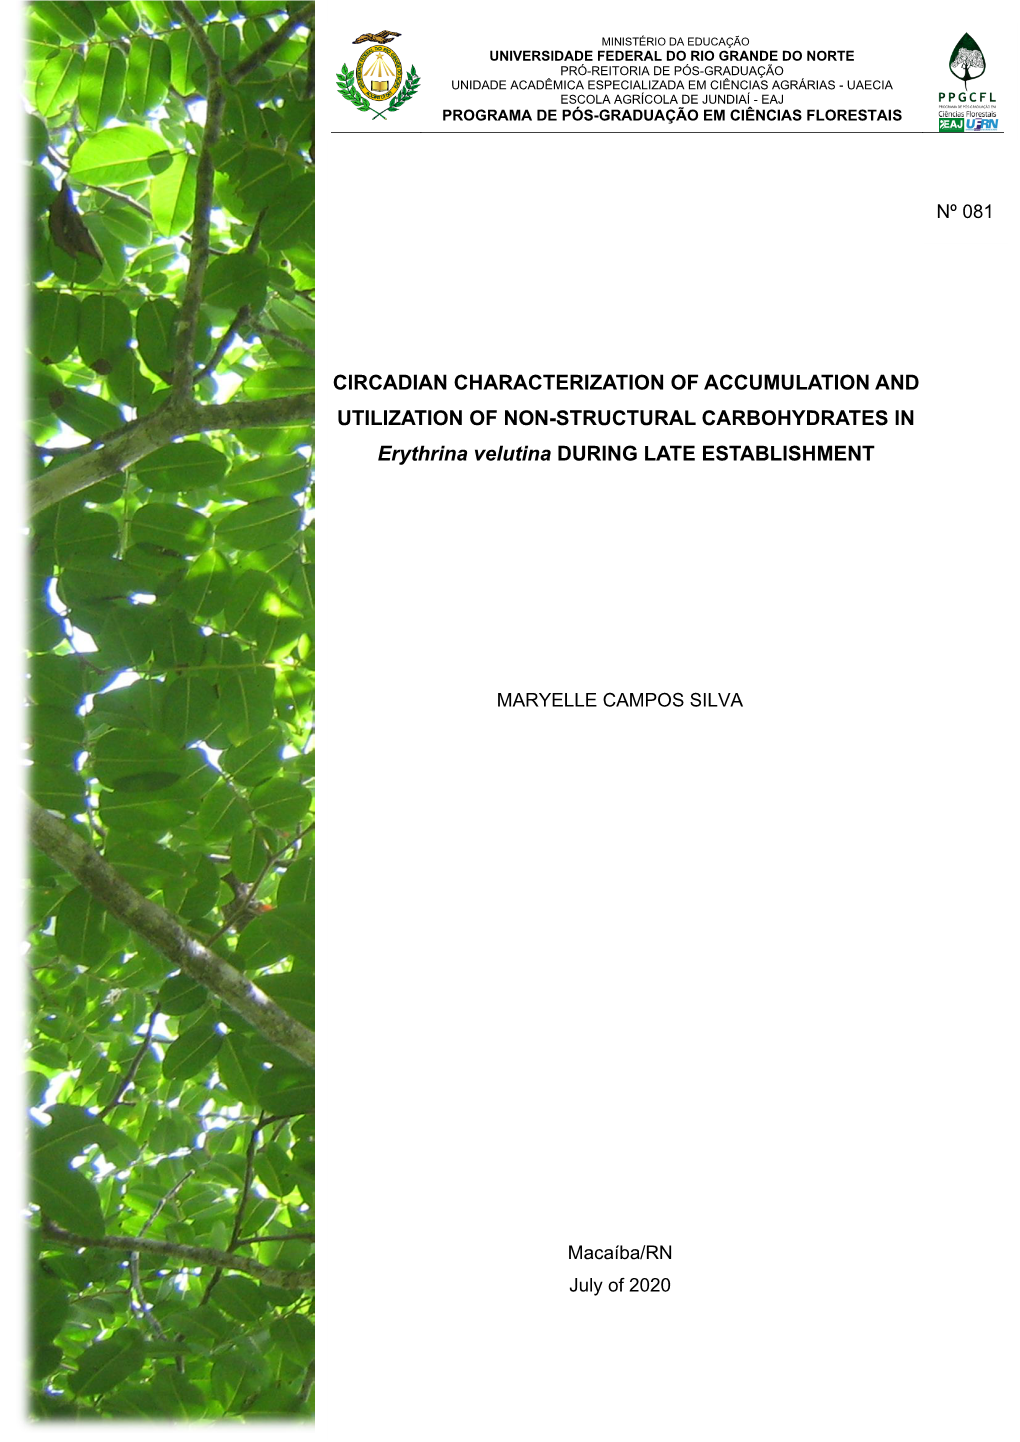 CIRCADIAN CHARACTERIZATION of ACCUMULATION and UTILIZATION of NON-STRUCTURAL CARBOHYDRATES in Erythrina Velutina DURING LATE ESTABLISHMENT